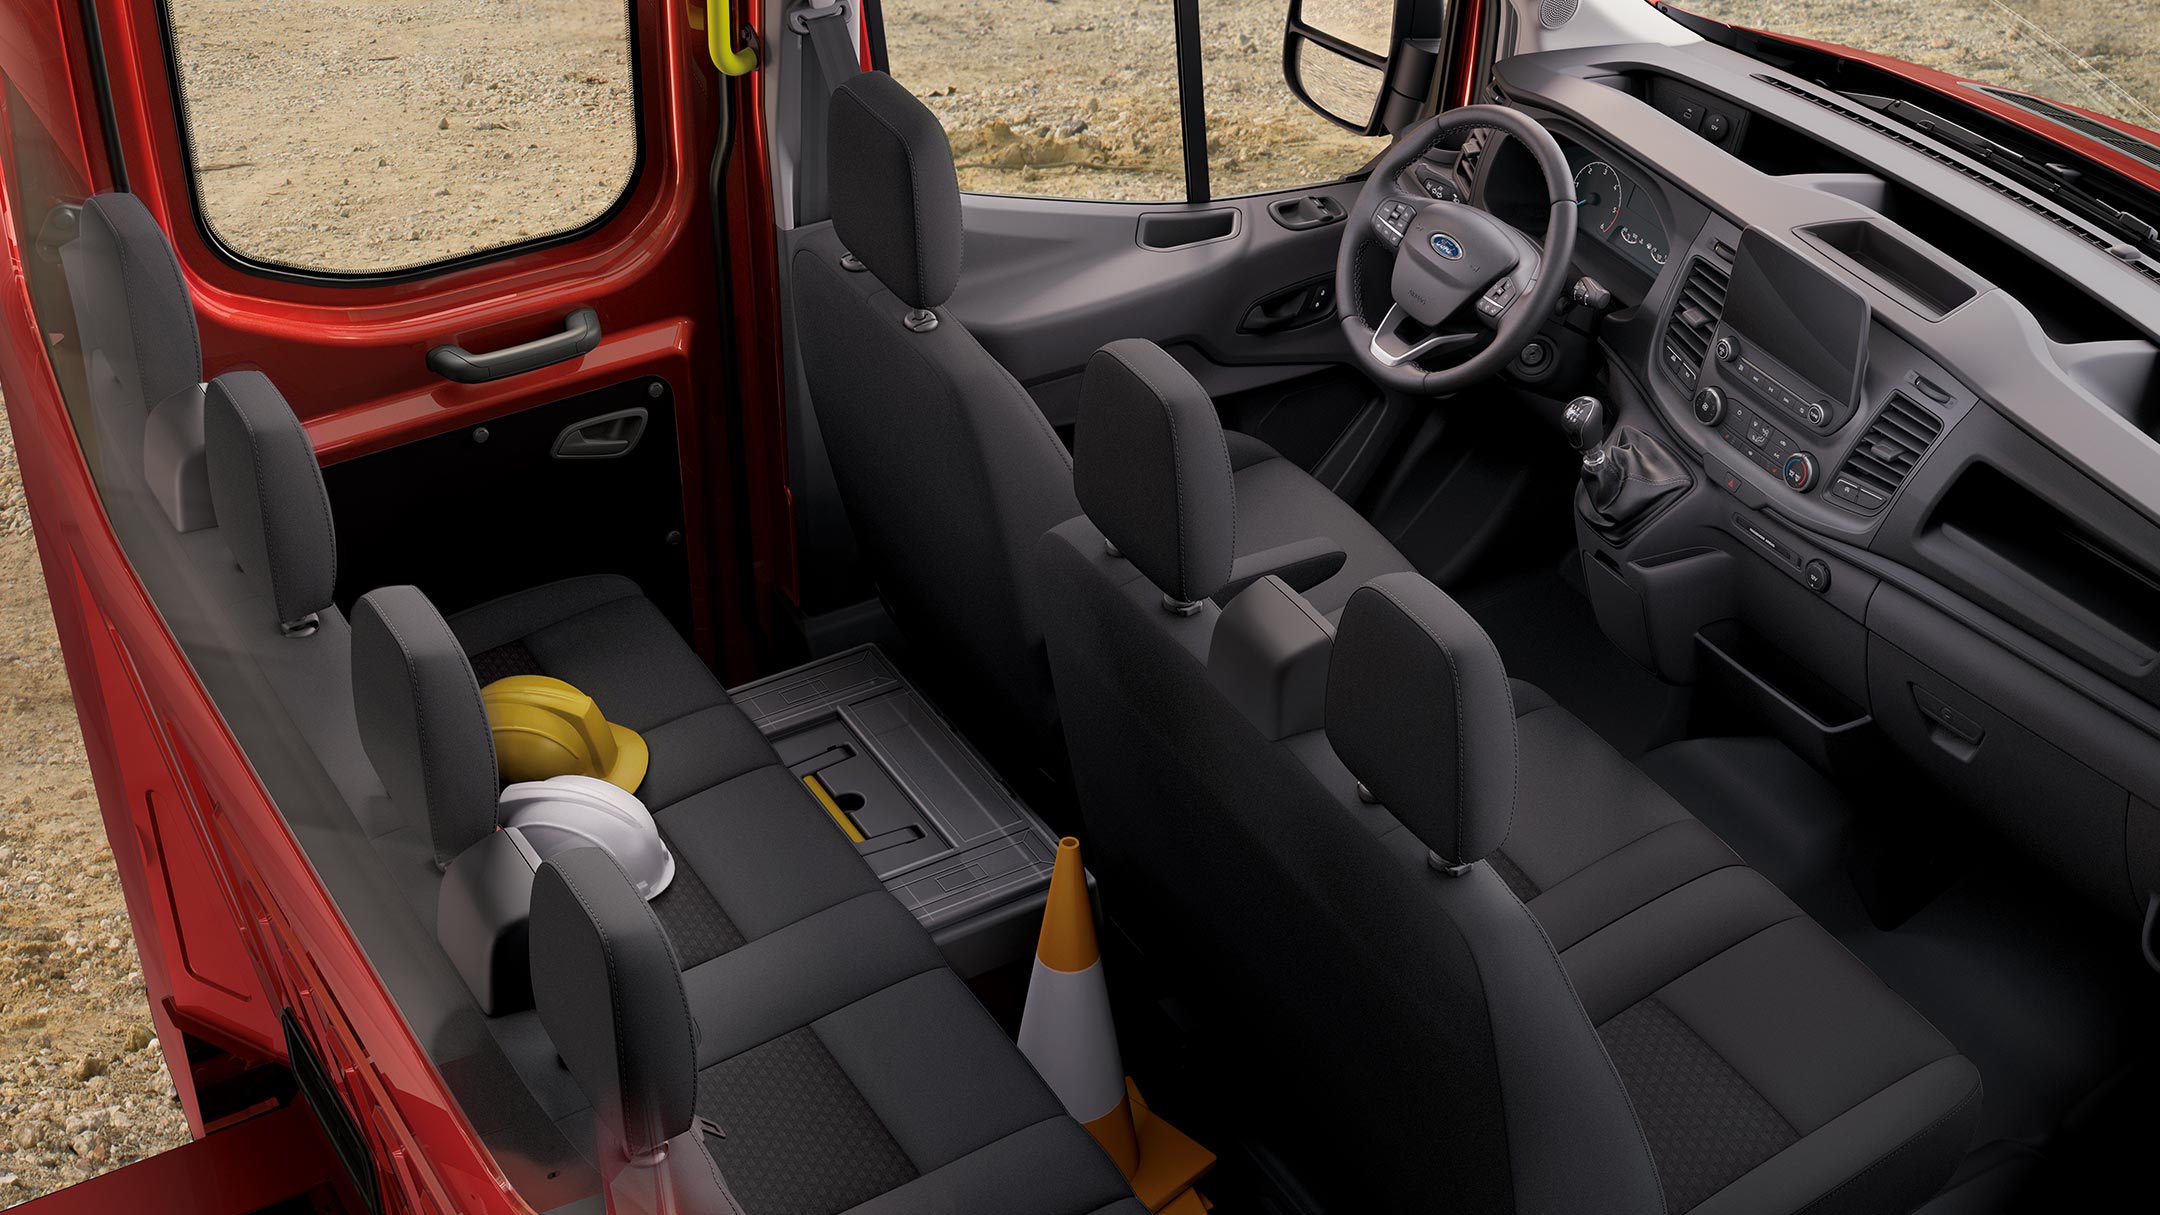 Ford Transit Chassis Cab interior cabin view